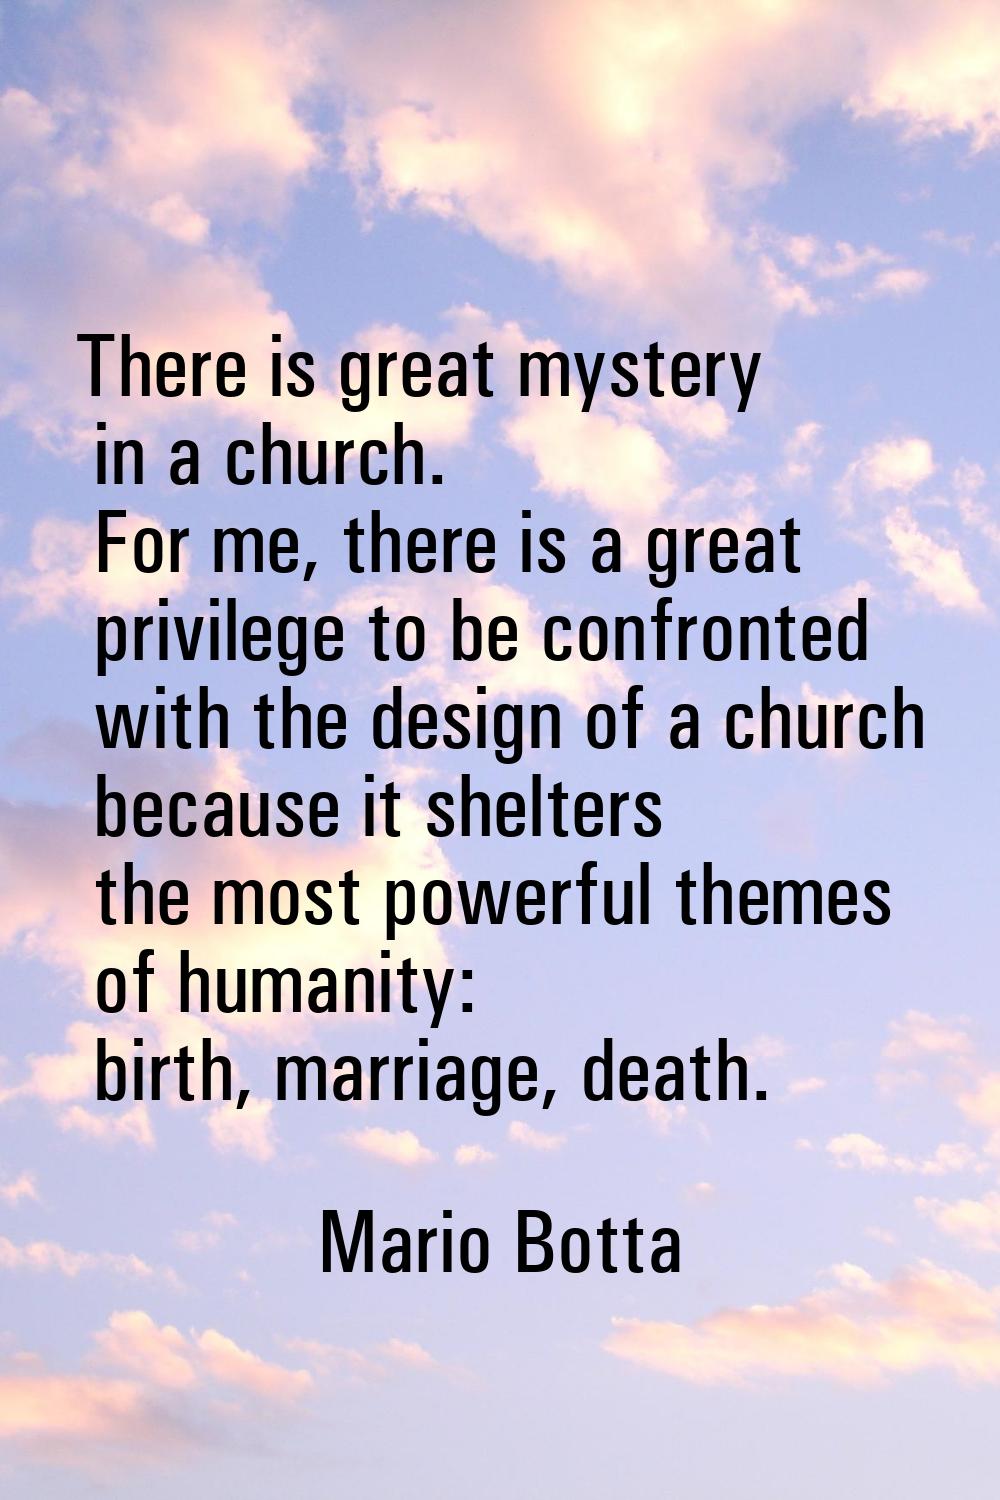 There is great mystery in a church. For me, there is a great privilege to be confronted with the de